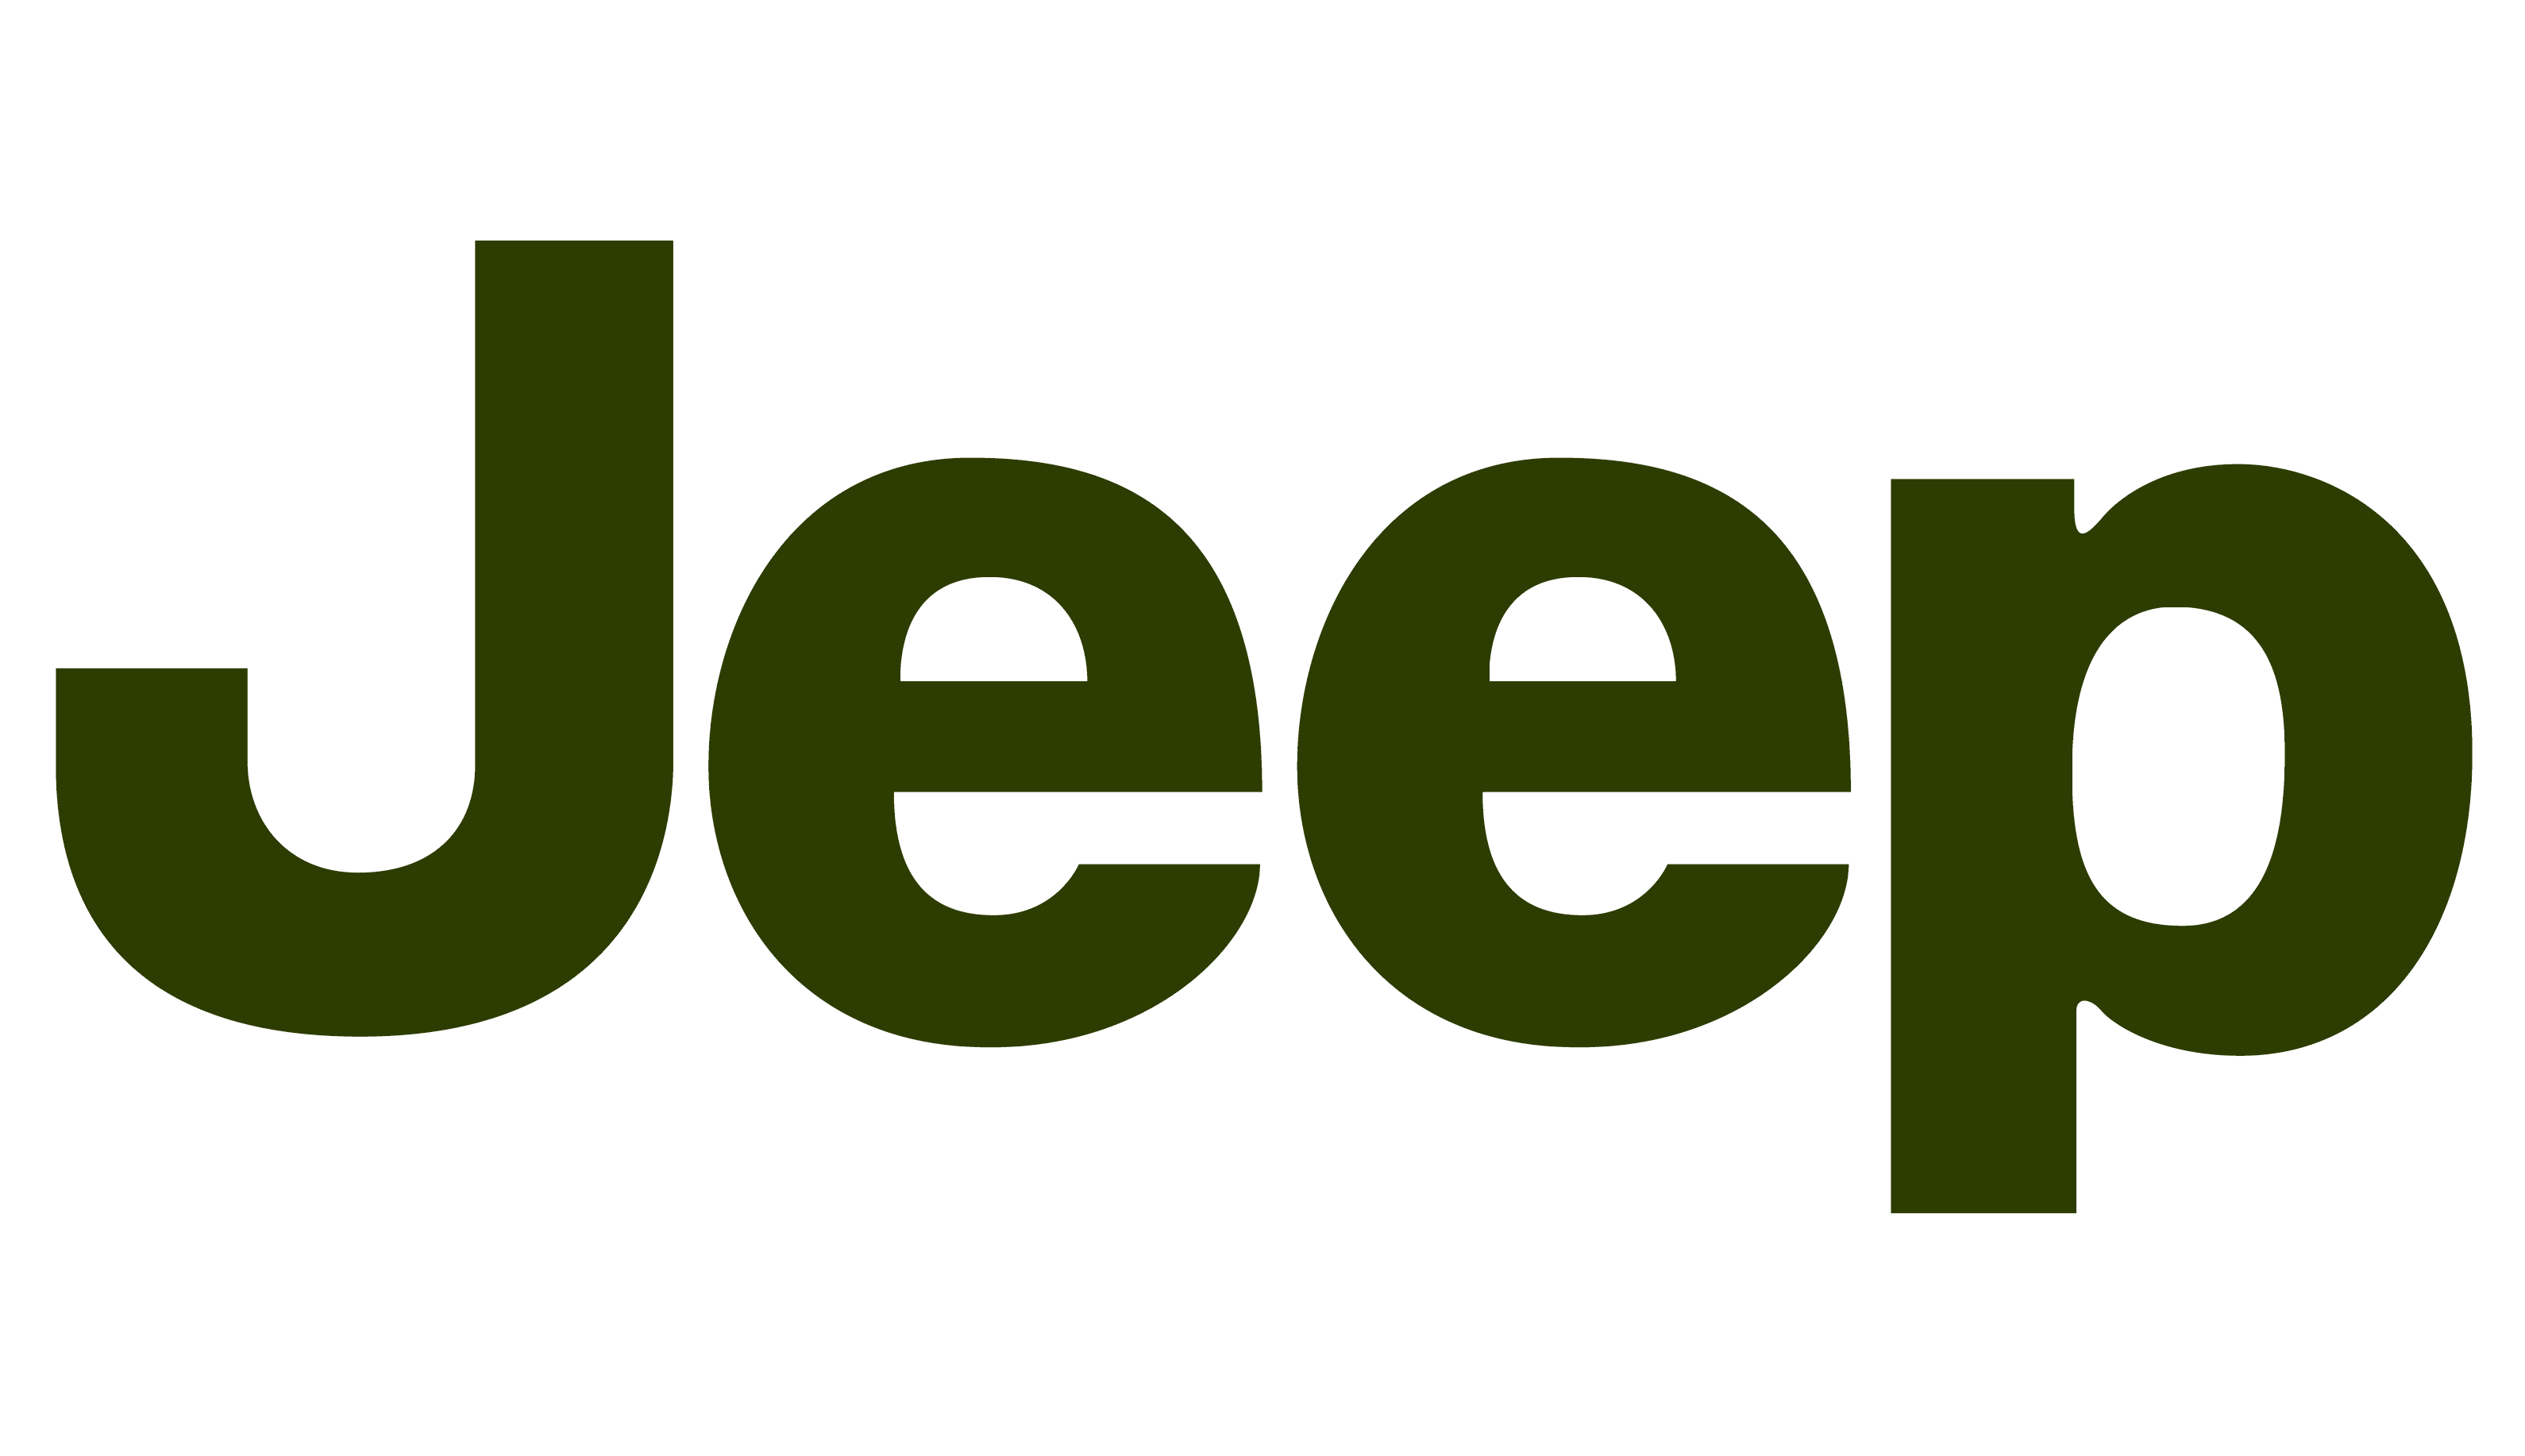 paintless dent removal jeep logo